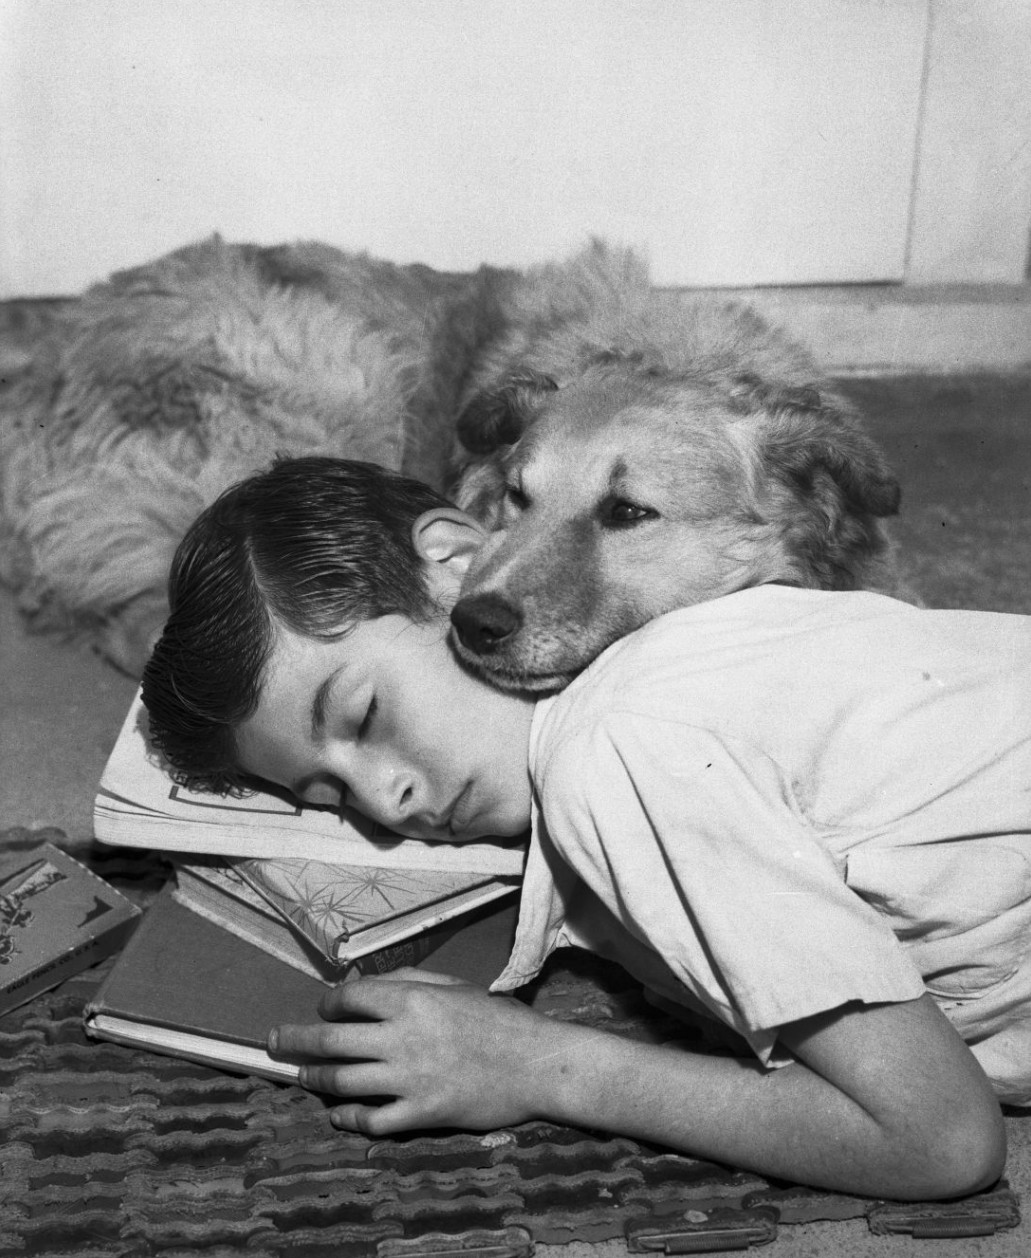 Boy and dog resting on doormat 1940